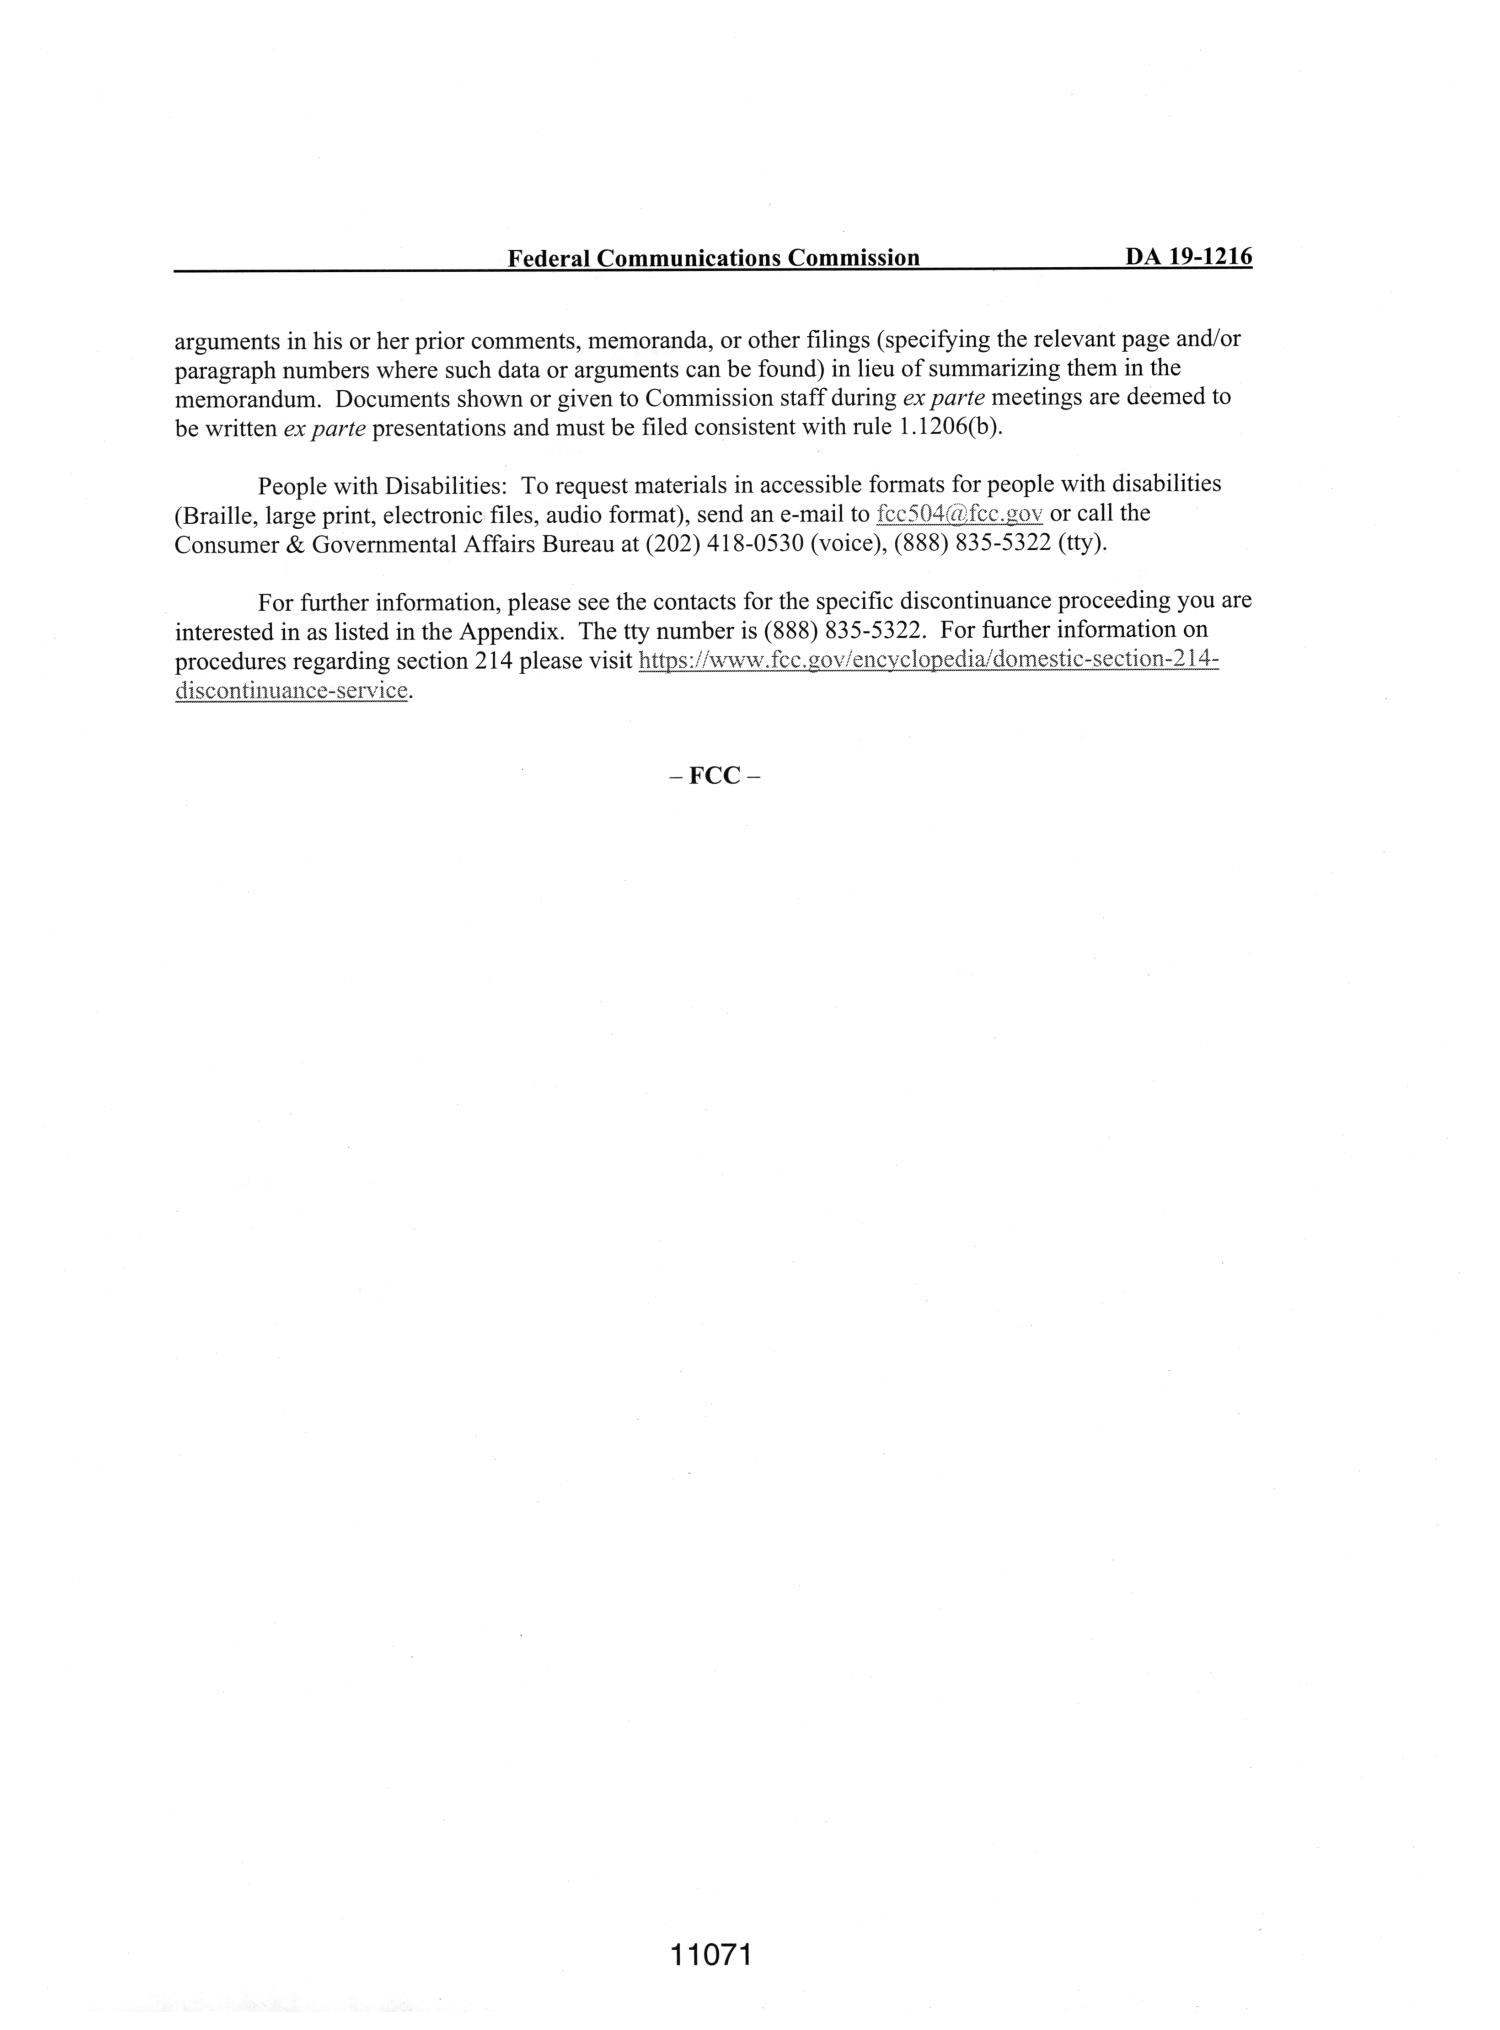 FCC Record, Volume 34, No. 14, Pages 11031 to 11845, November 25 - December 6, 2019
                                                
                                                    11071
                                                